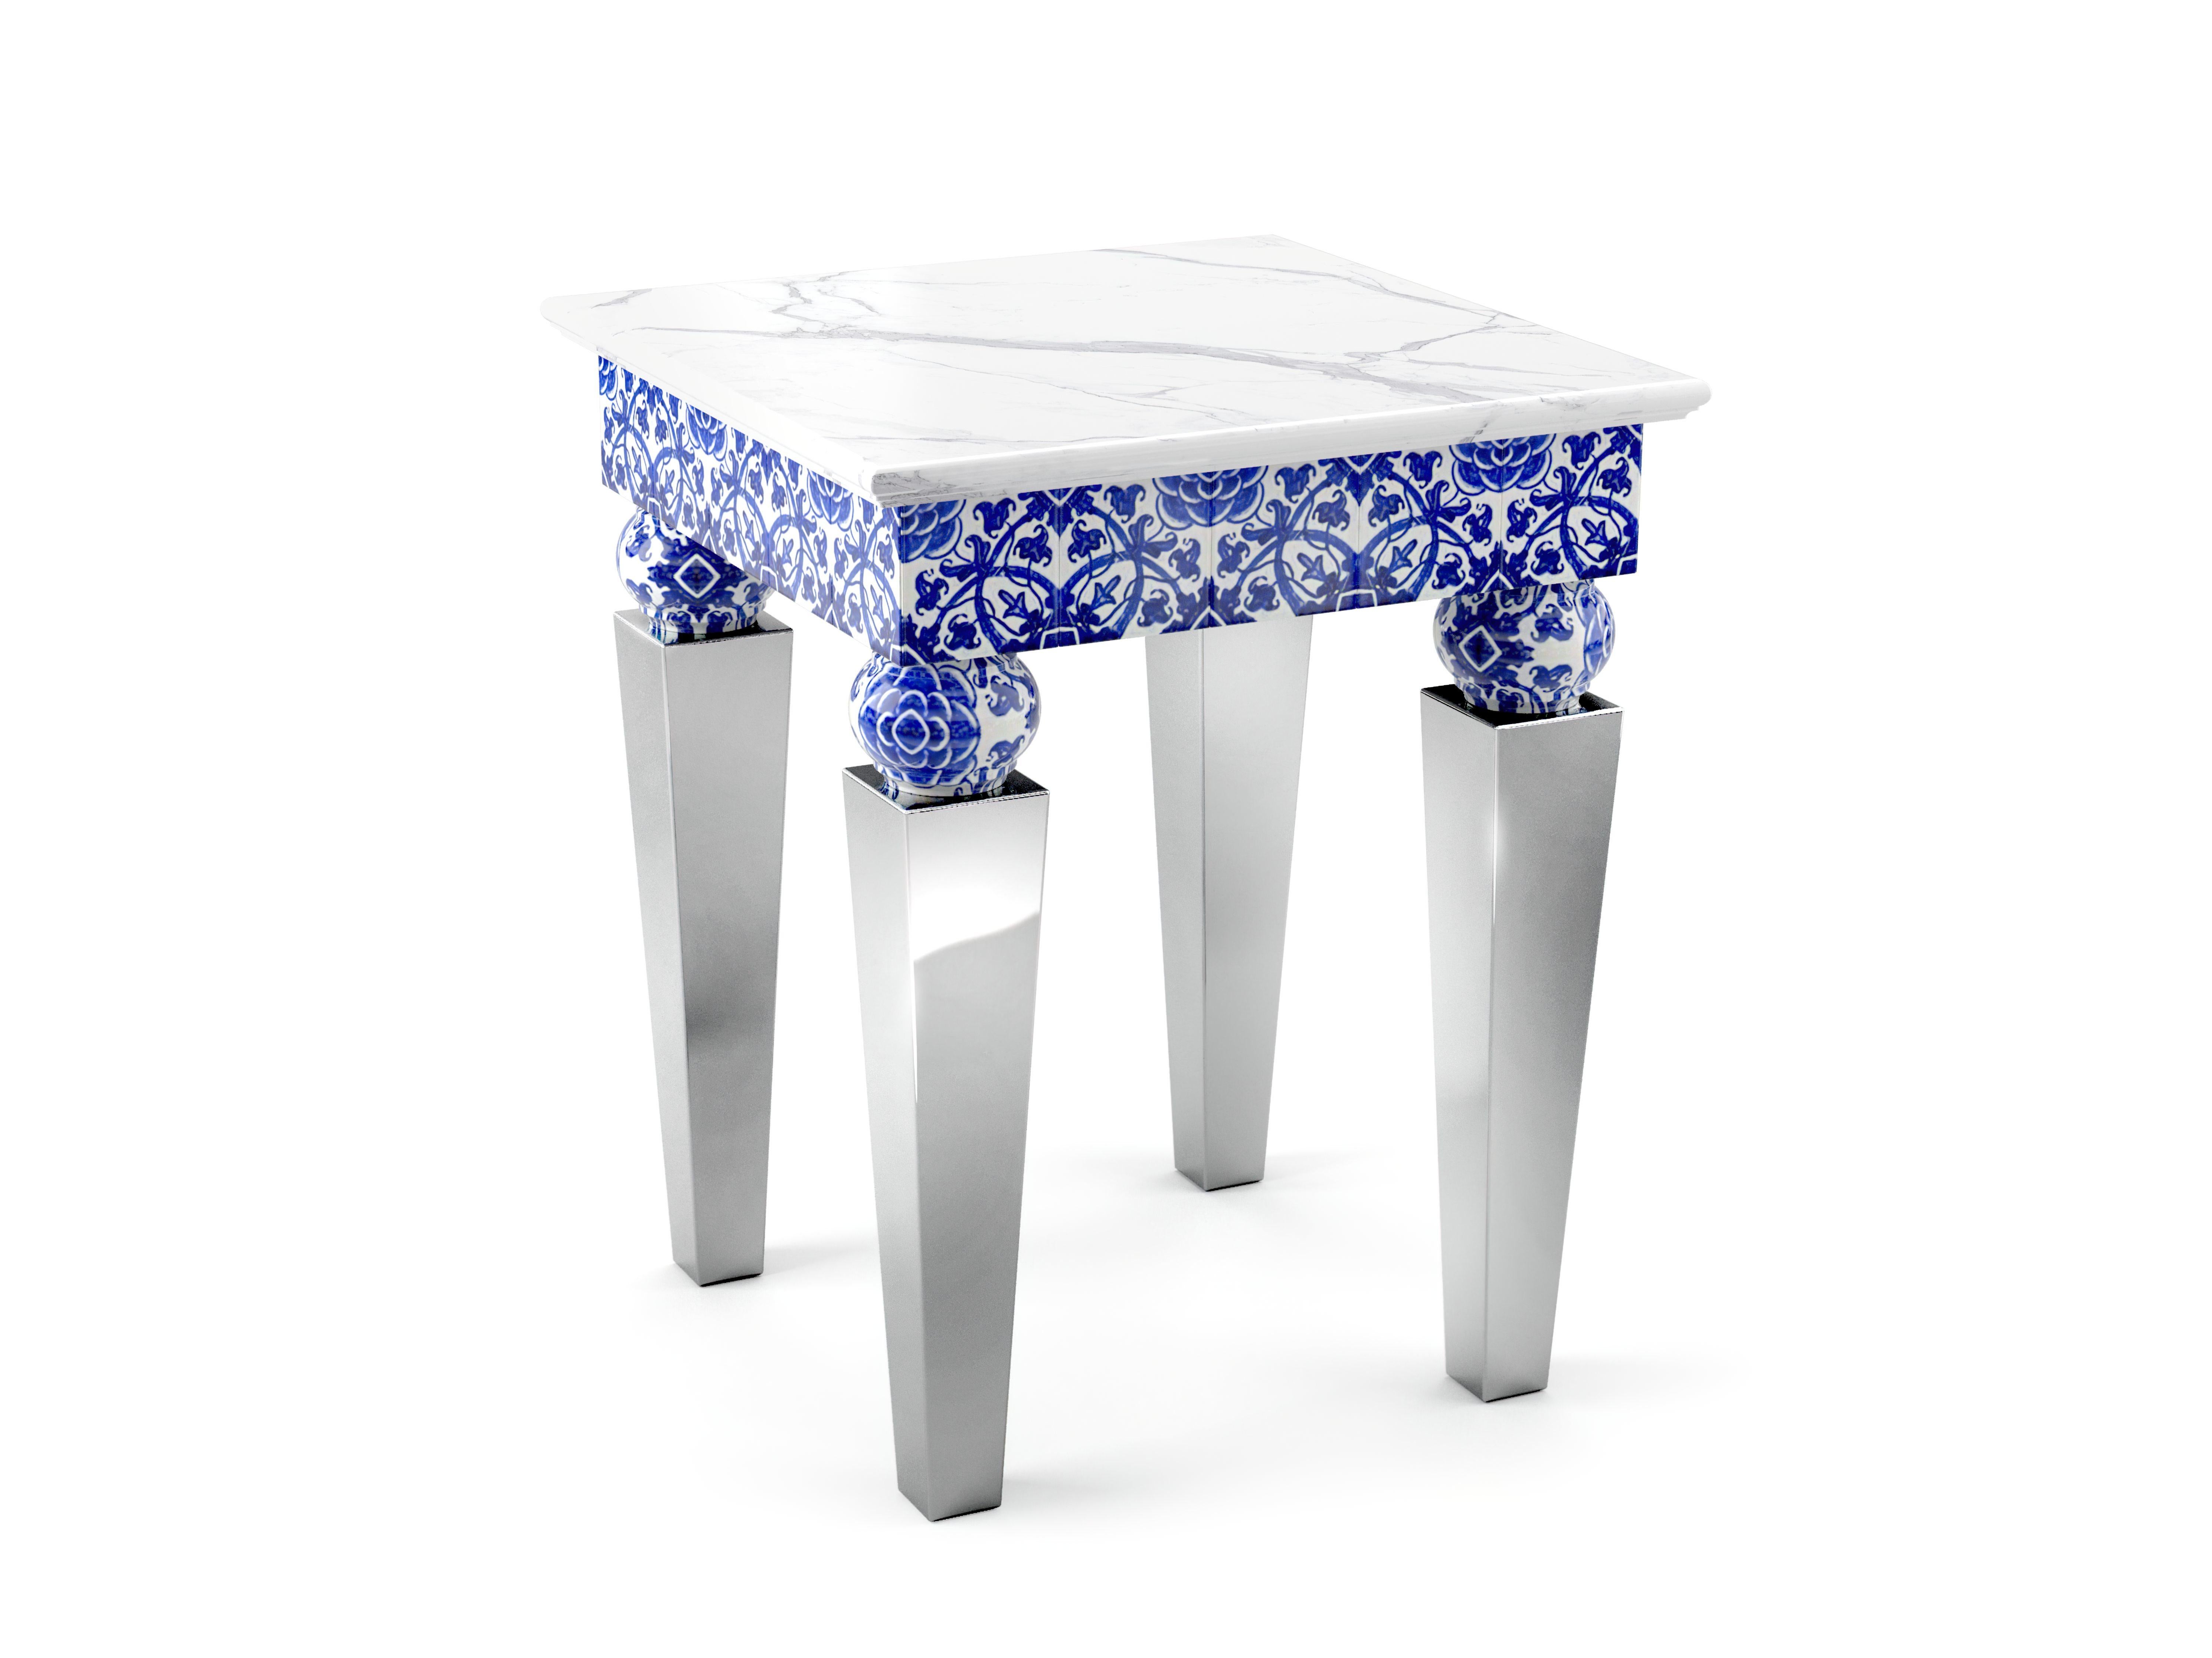 Side Table White Marble Top Mirror Steel Legs Green Majolica Tiles, Also Outdoor In New Condition For Sale In Recanati, IT